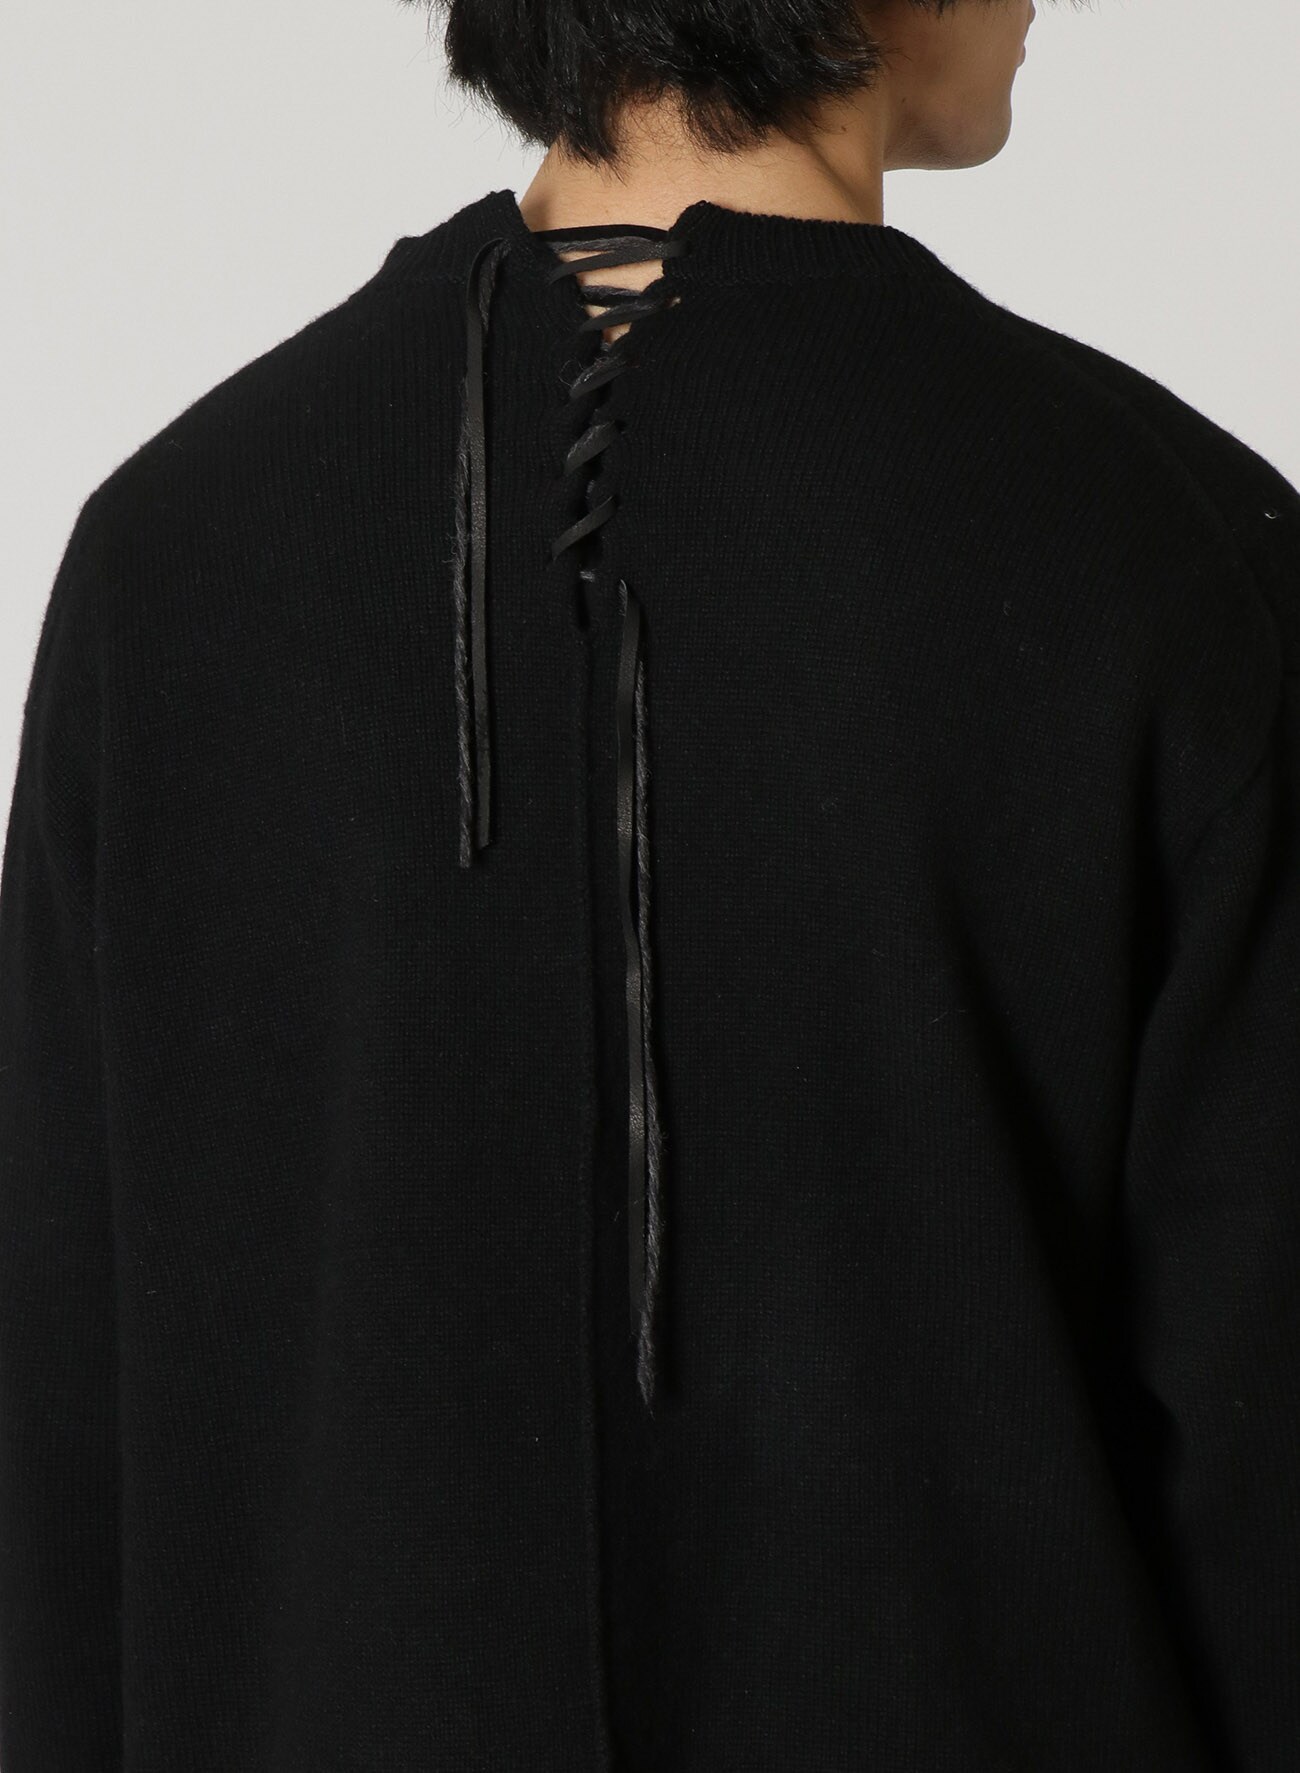 LEATHER STRING PS LETHER STRING CREW NECK